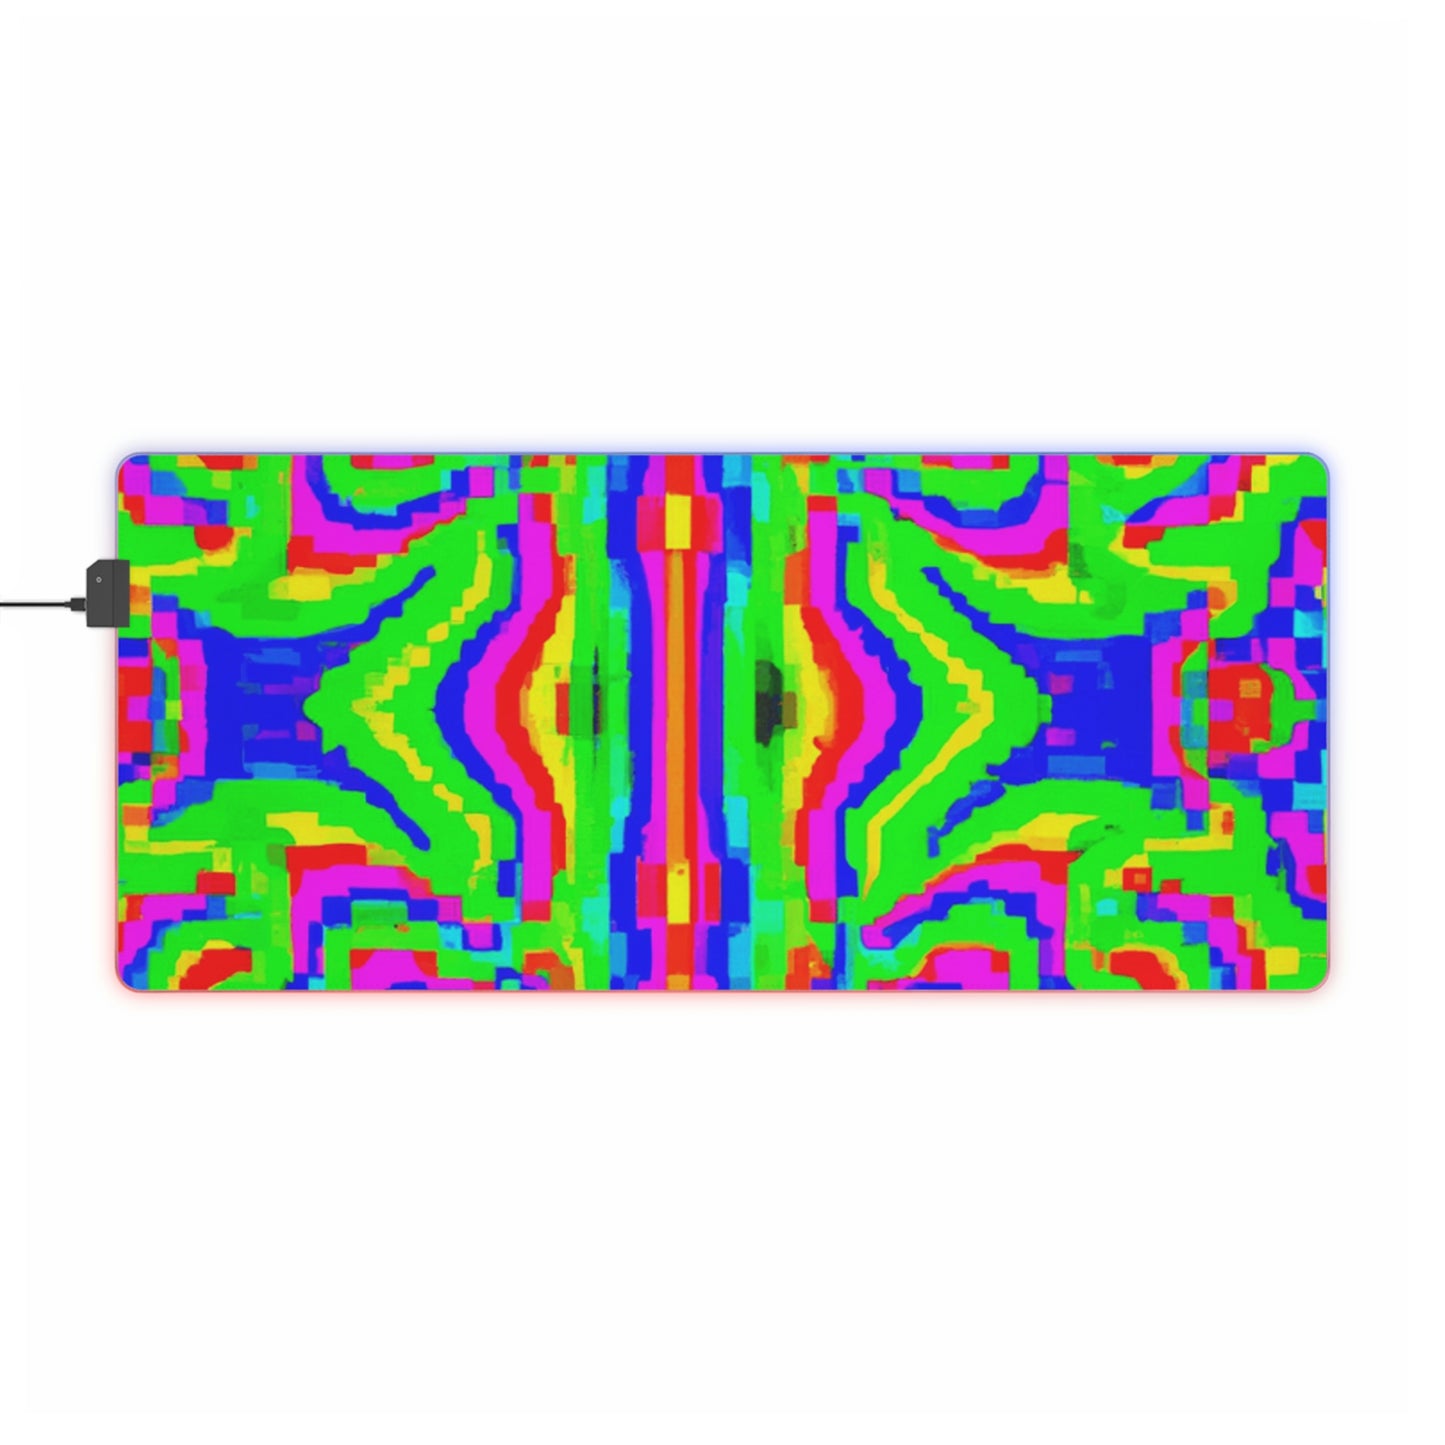 Rock Joe Brodie - Psychedelic Trippy LED Light Up Gaming Mouse Pad